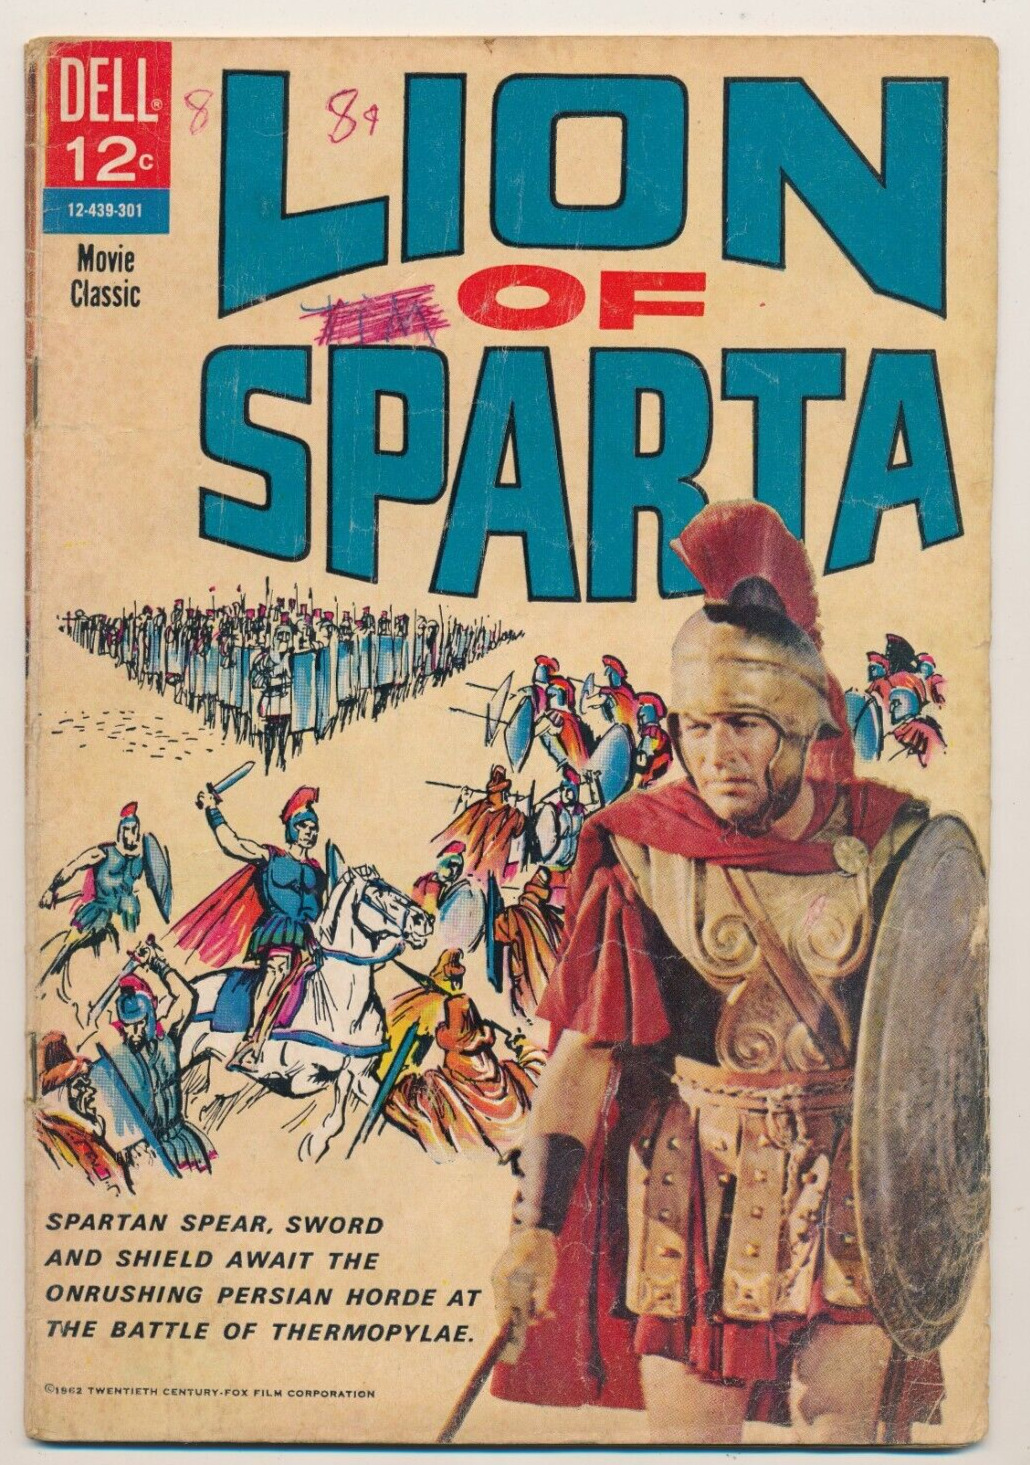 Lion of Sparta # 1 Jan. 1963 Dell Comics Movie Classic GD/VG 3.0 Nice Reader